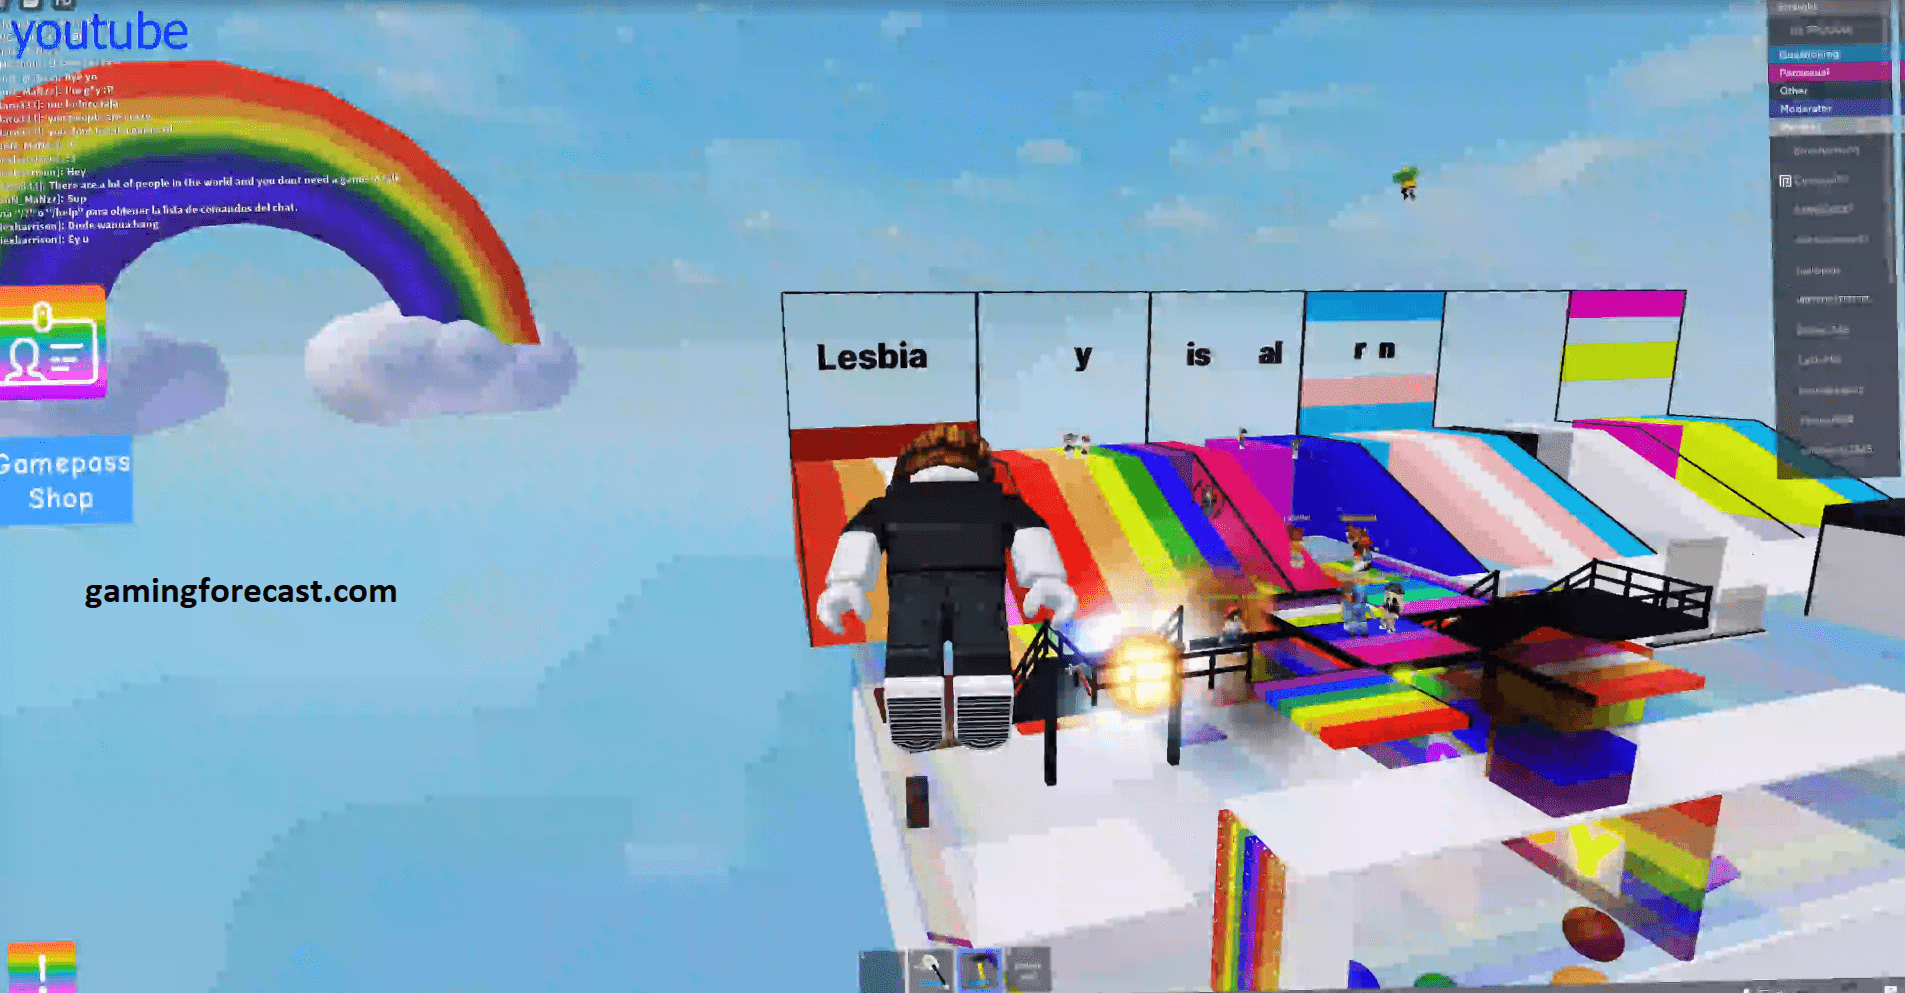 Roblox Hack Download Pc Destroy Lobby Fly Aimbot Scripts 2021 Gaming Forecast Download Free Online Game Hacks - roblox glitch cheat